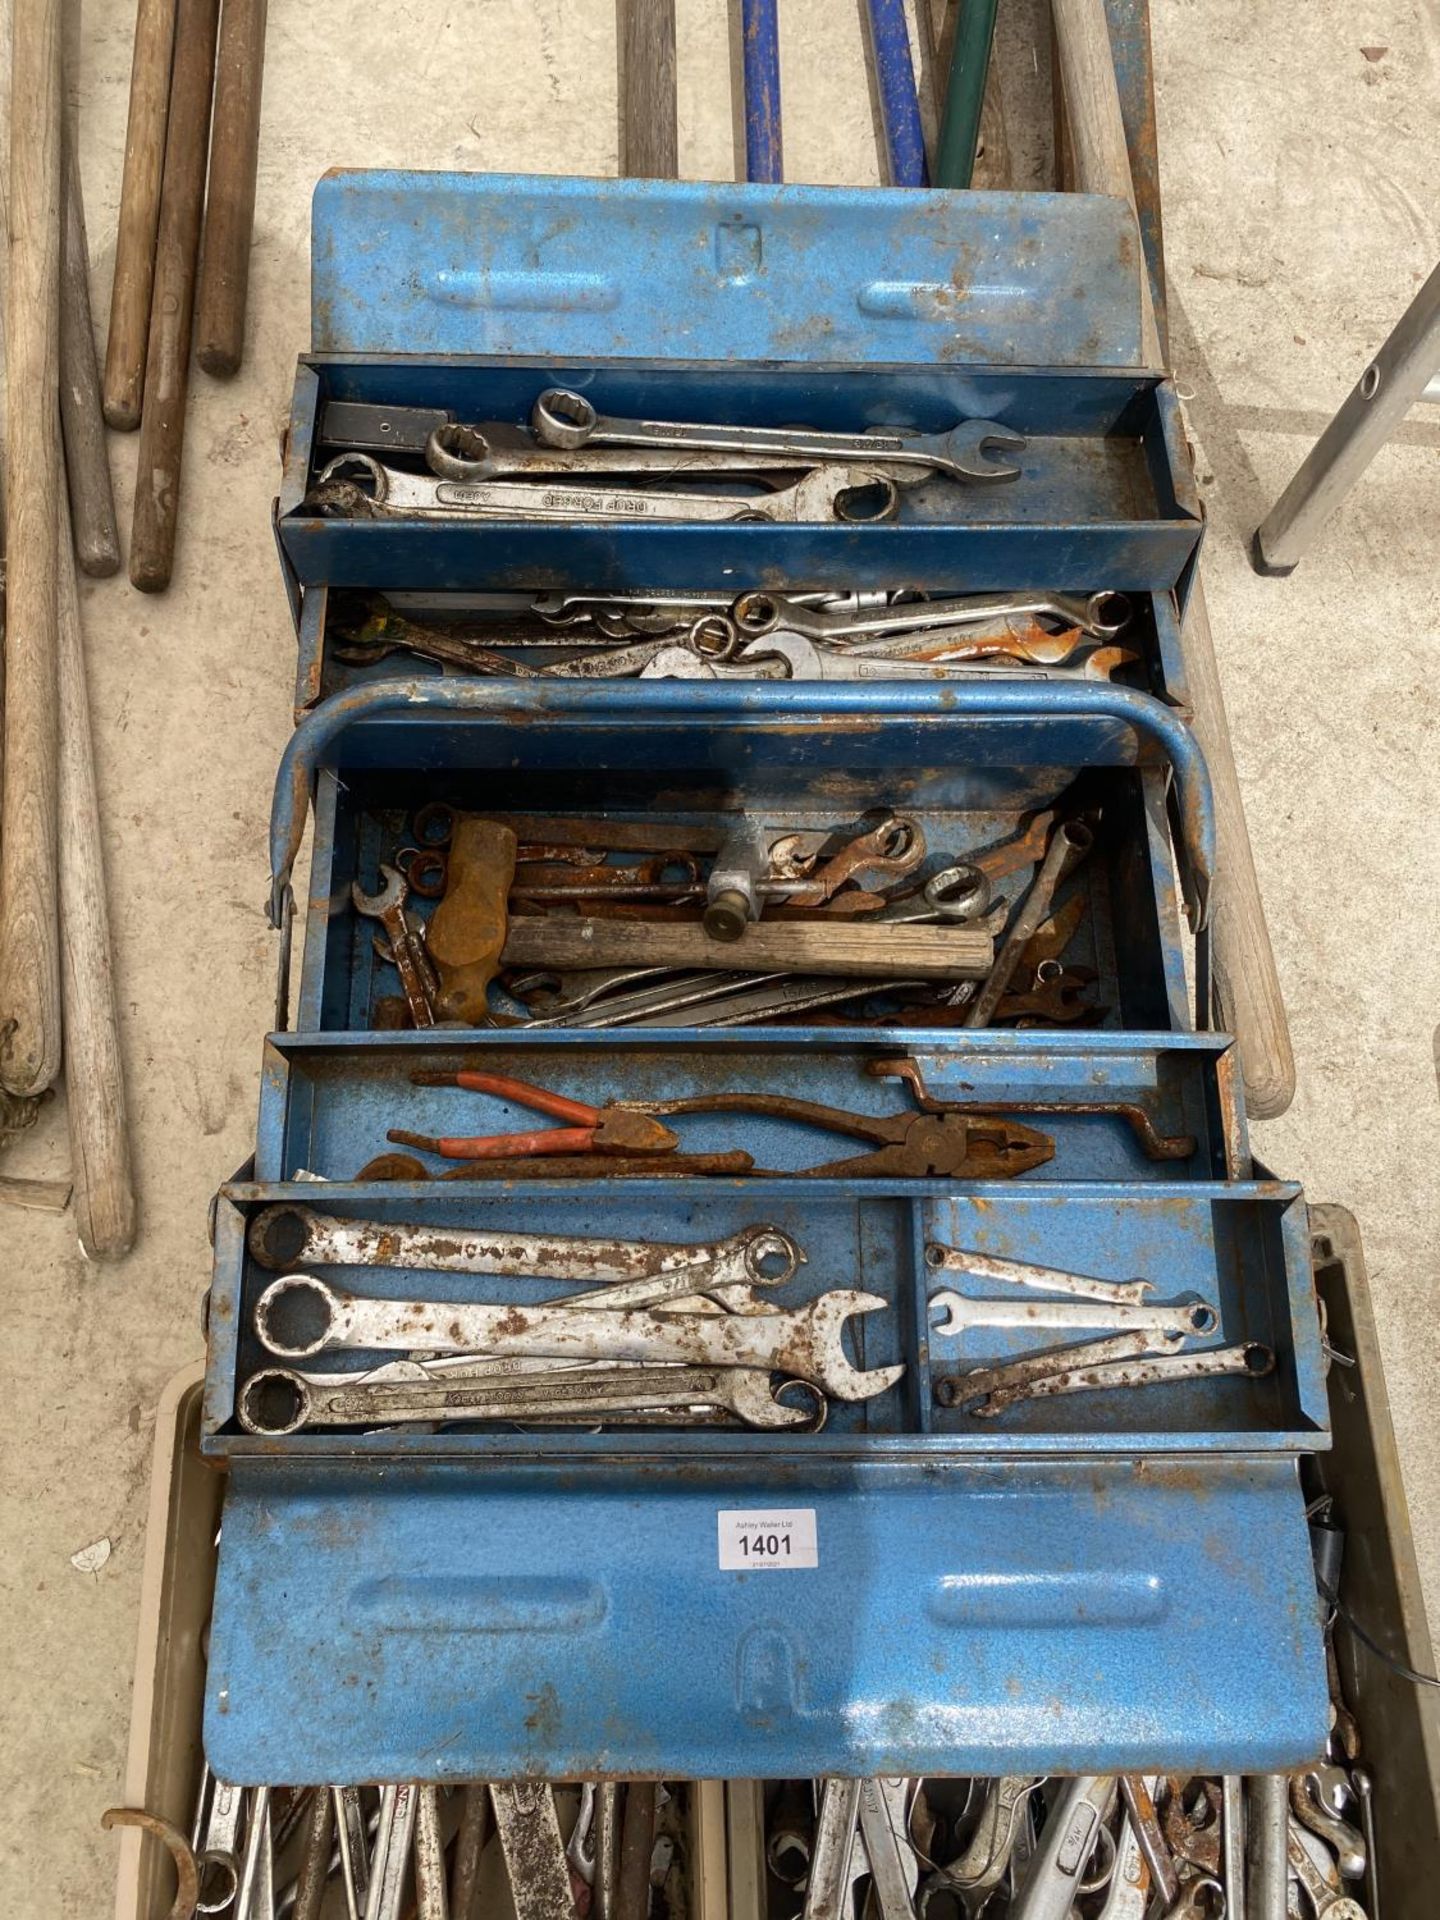 A LARGE QUANTITY OF ASSORTED SPANNERS - Image 4 of 4